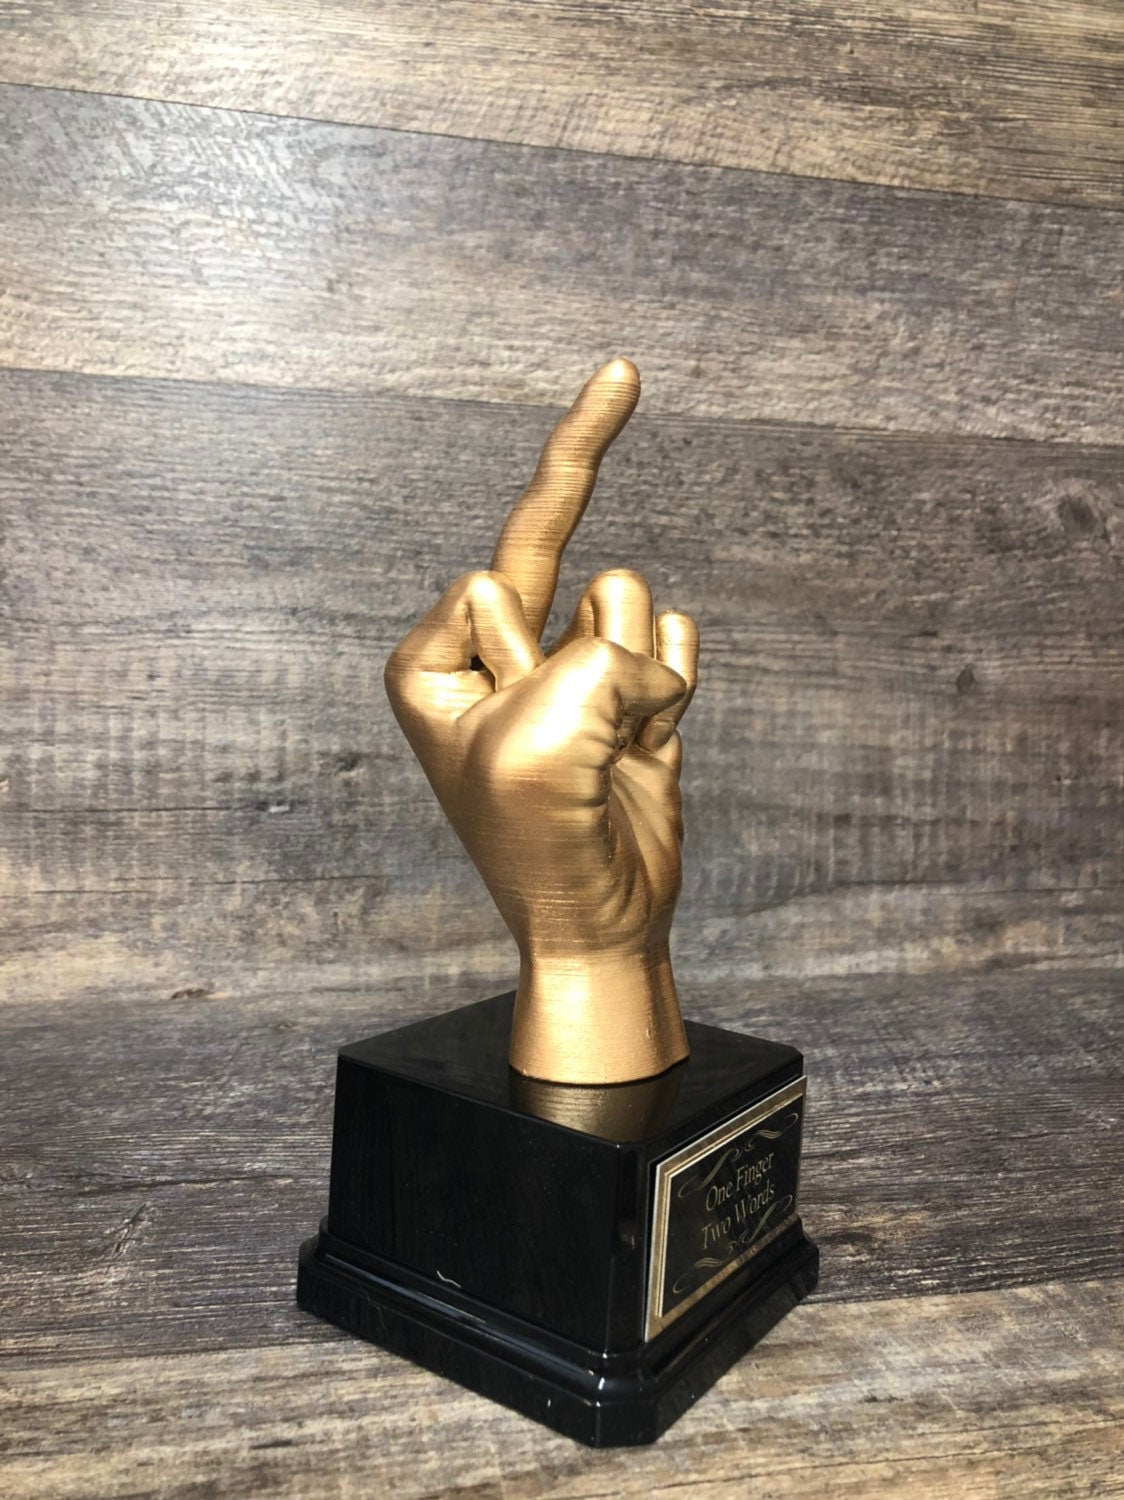 Funny Trophy You're #1 Middle Finger Gag Gift Adult Humor Retirement Gift Funny Achievement Award Flipping You The Bird One Finger Two Words